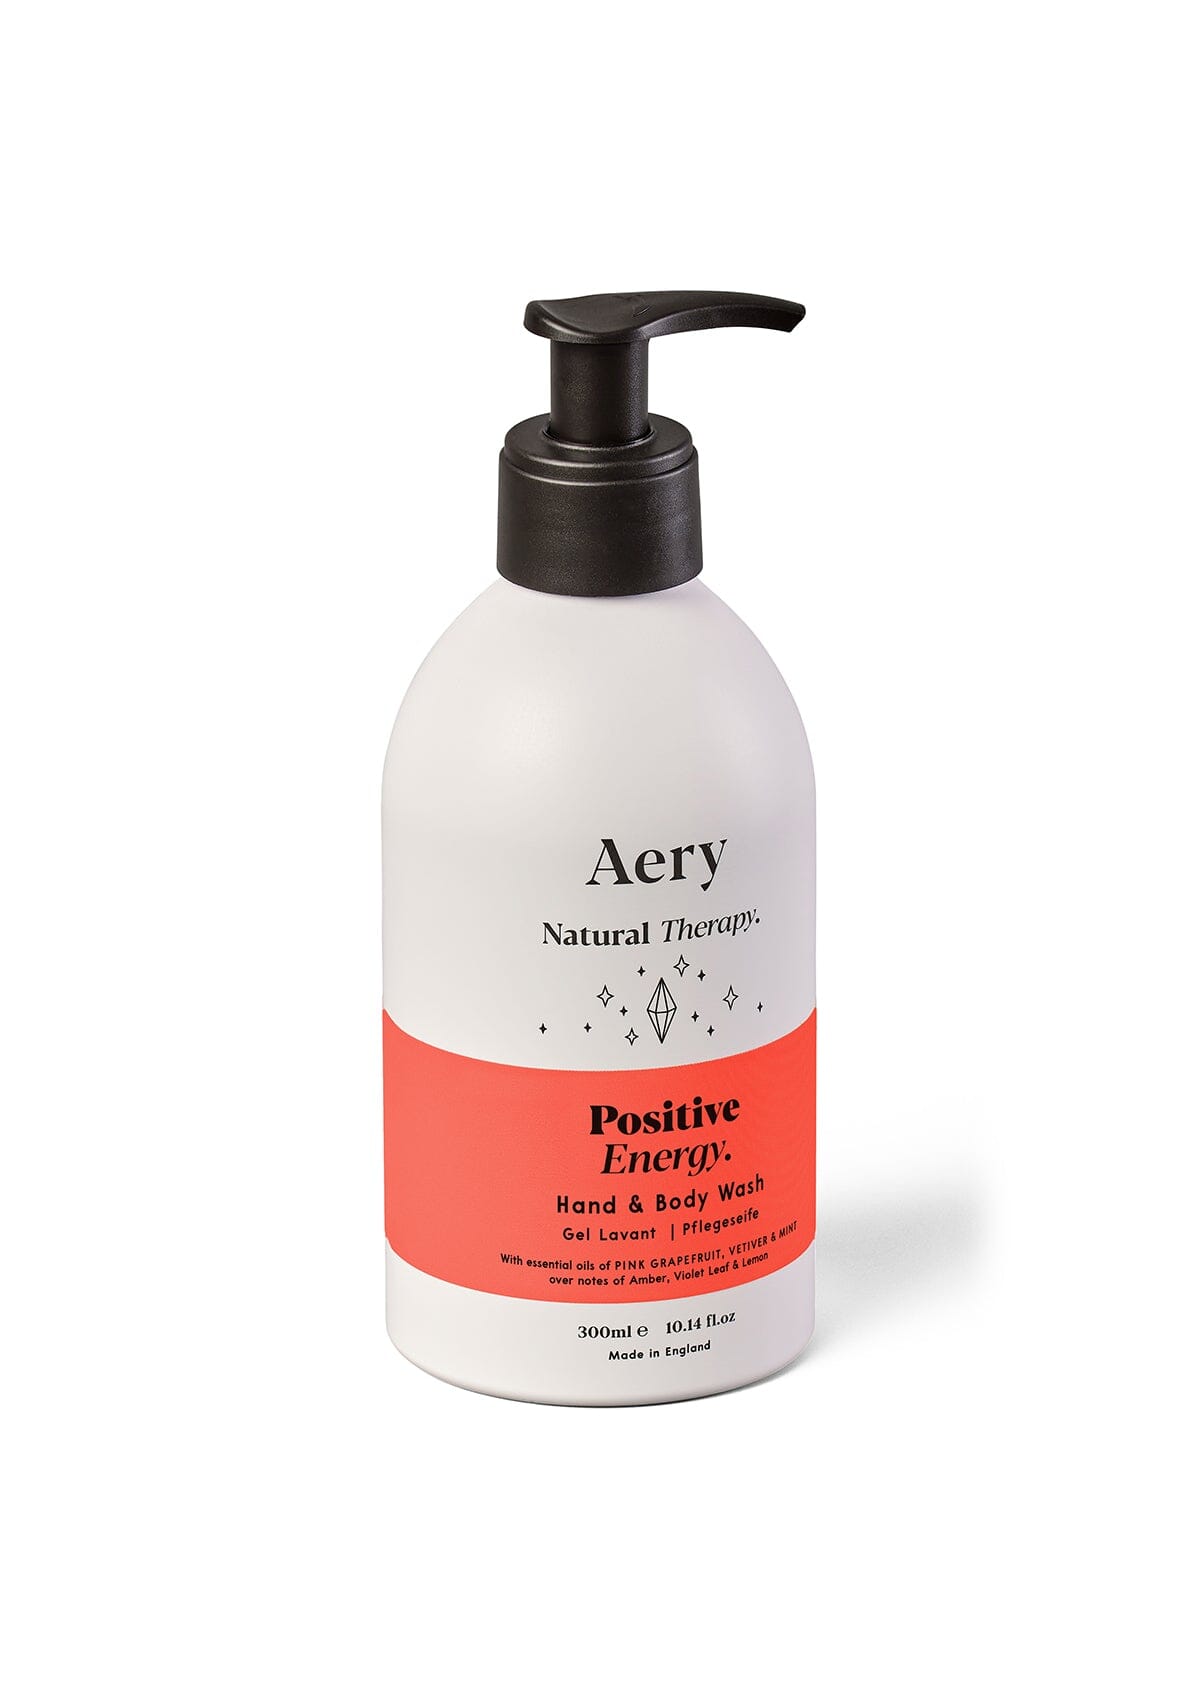 Positive energy hand and body wash by aery displayed on white background 